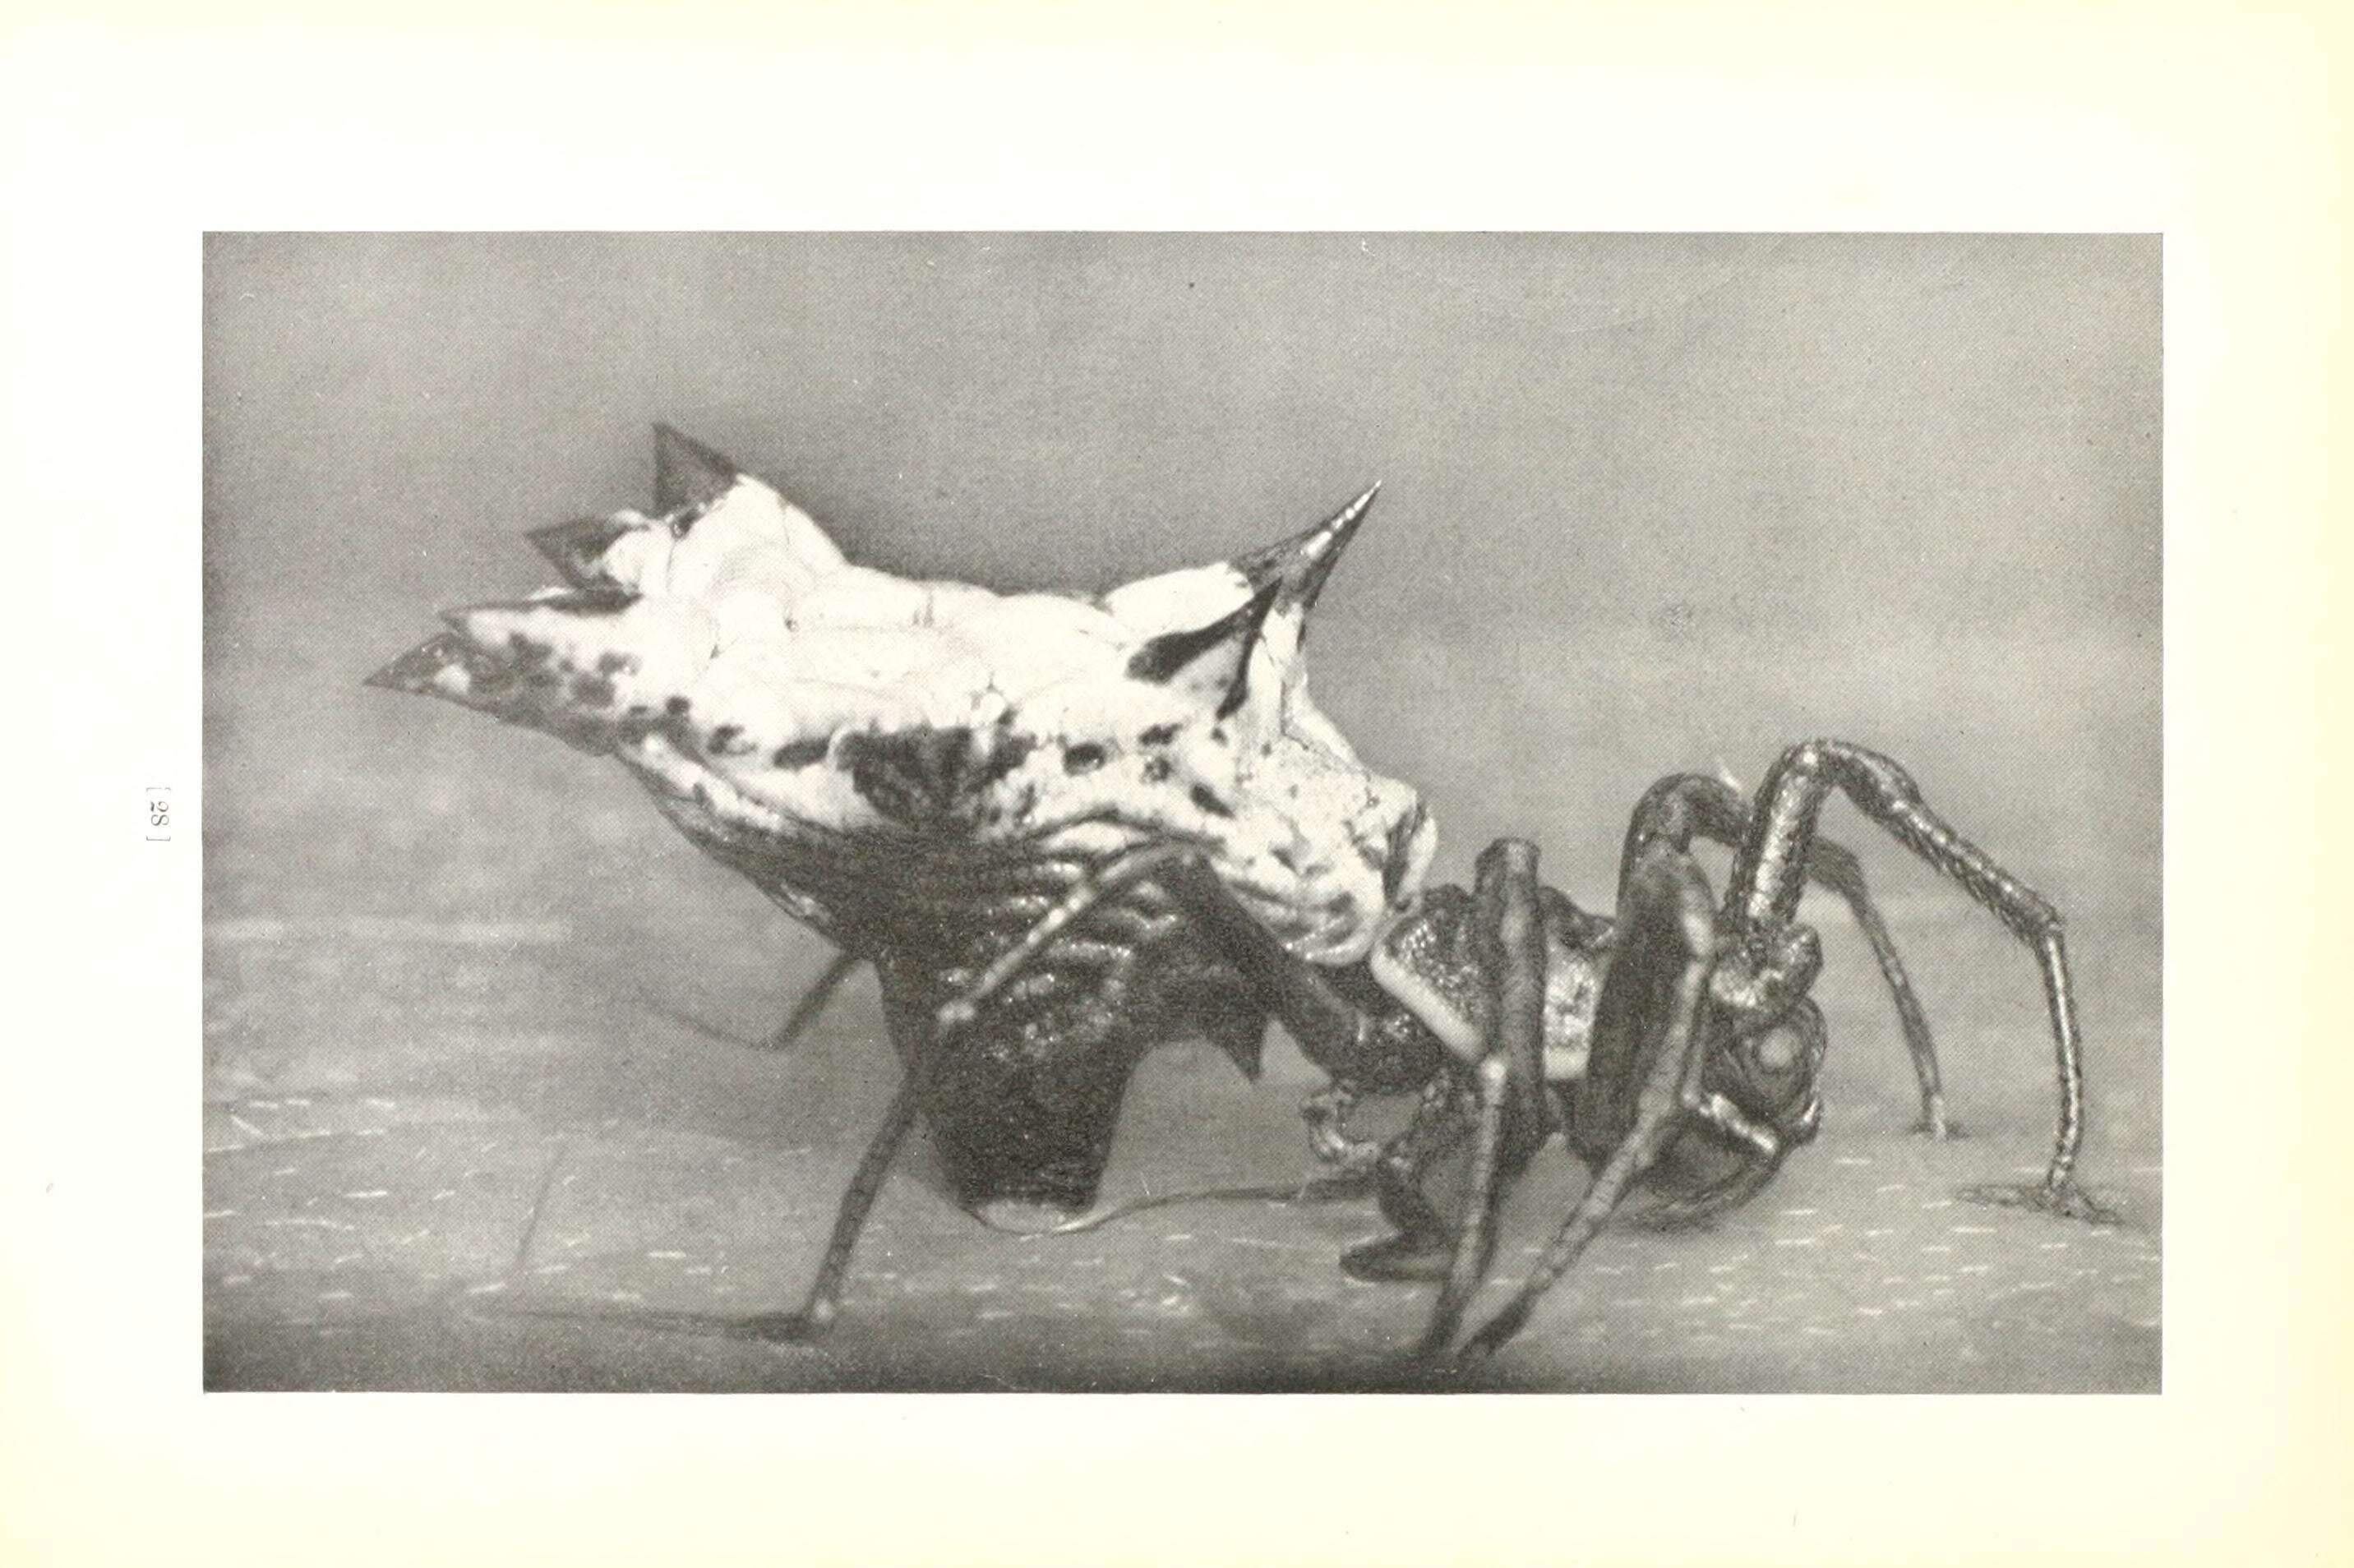 Image of Spined Micrathena